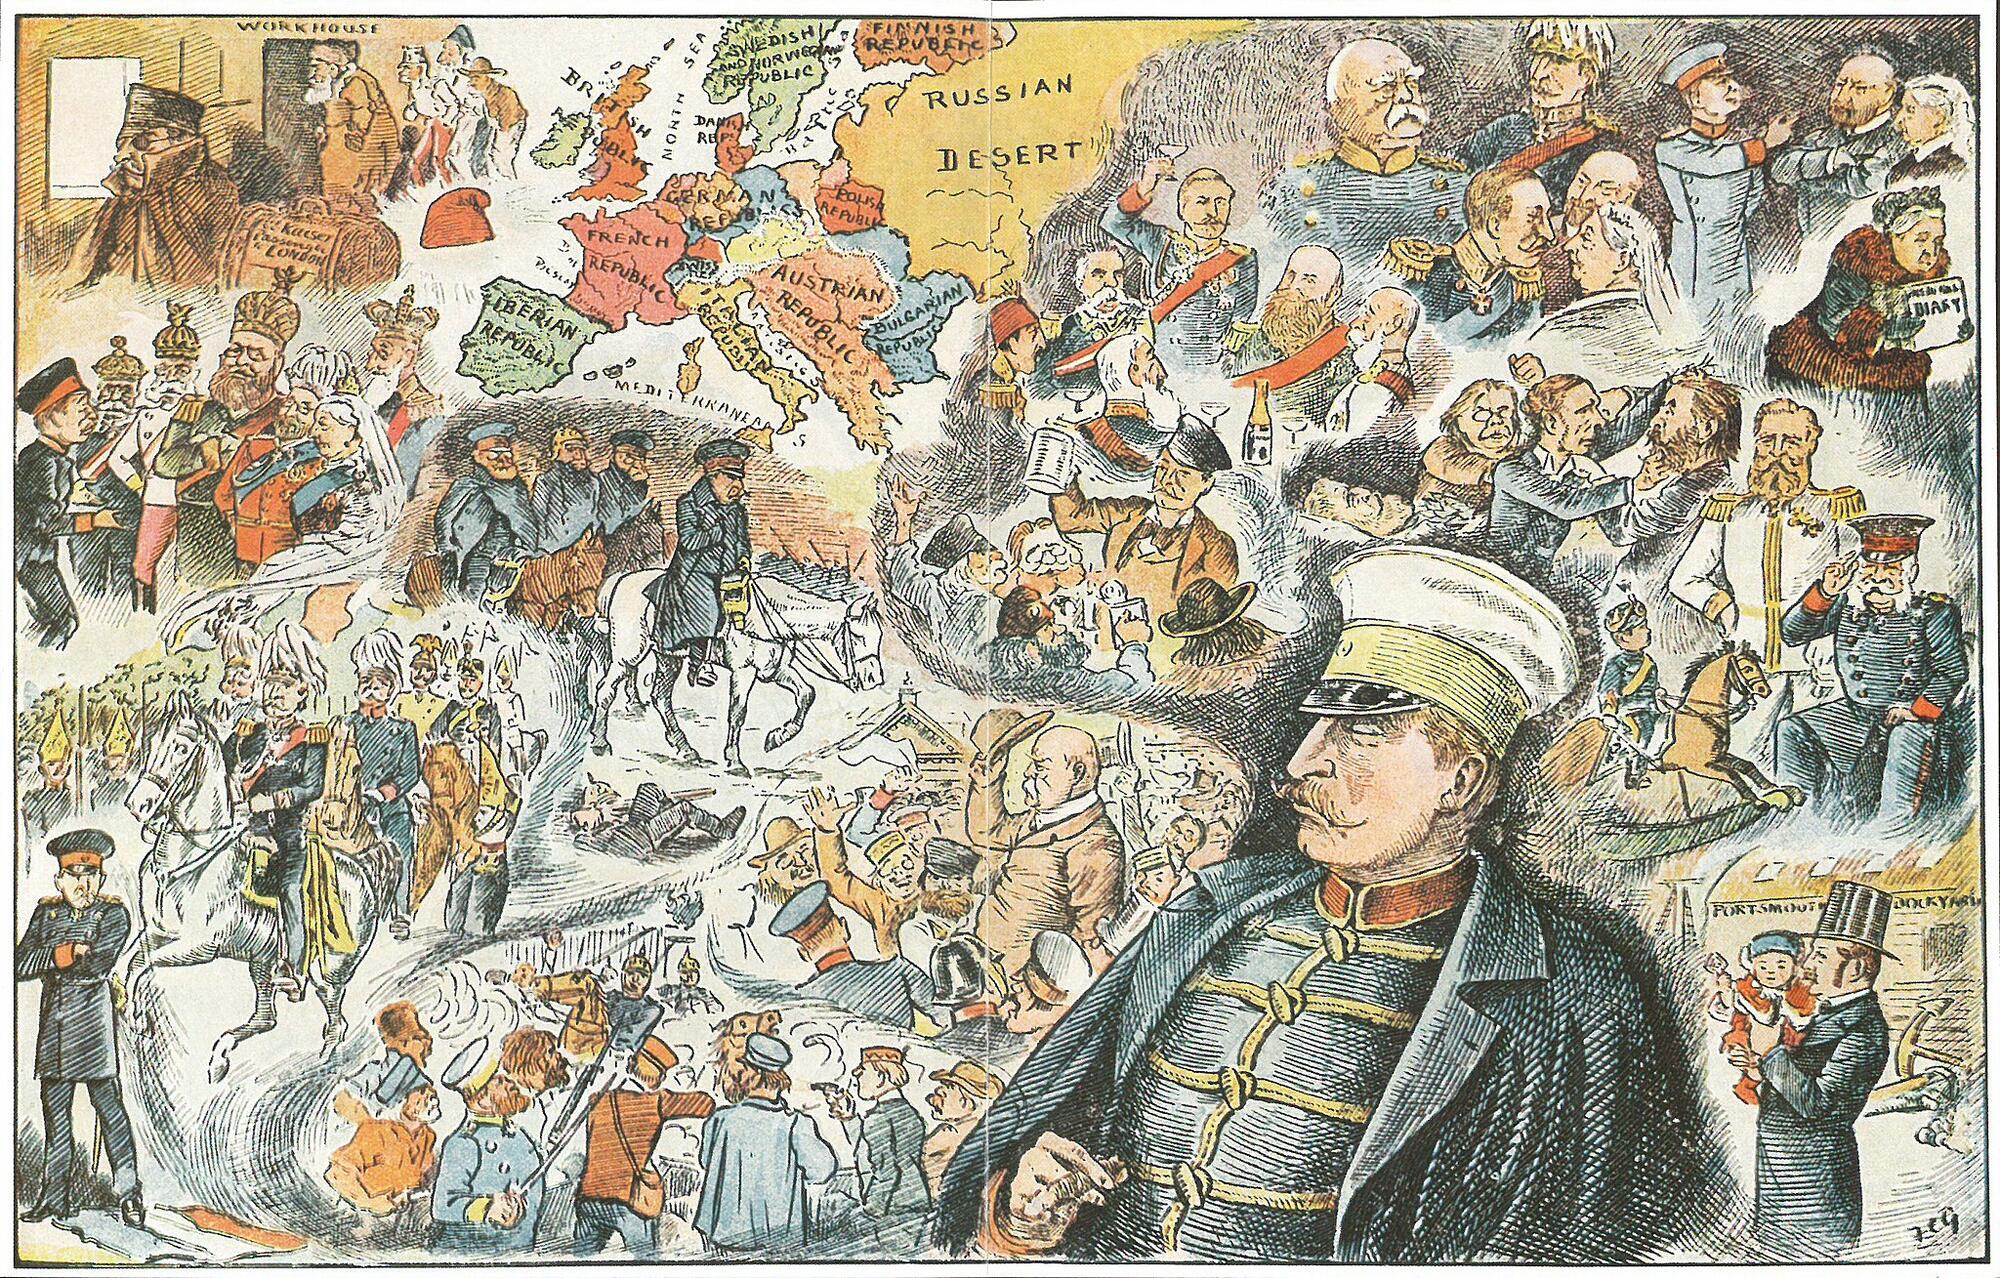 Illustration of "The Kaiser's Dream", from the Christmas 1890 issue of Truth dedicated to "hypnotism".